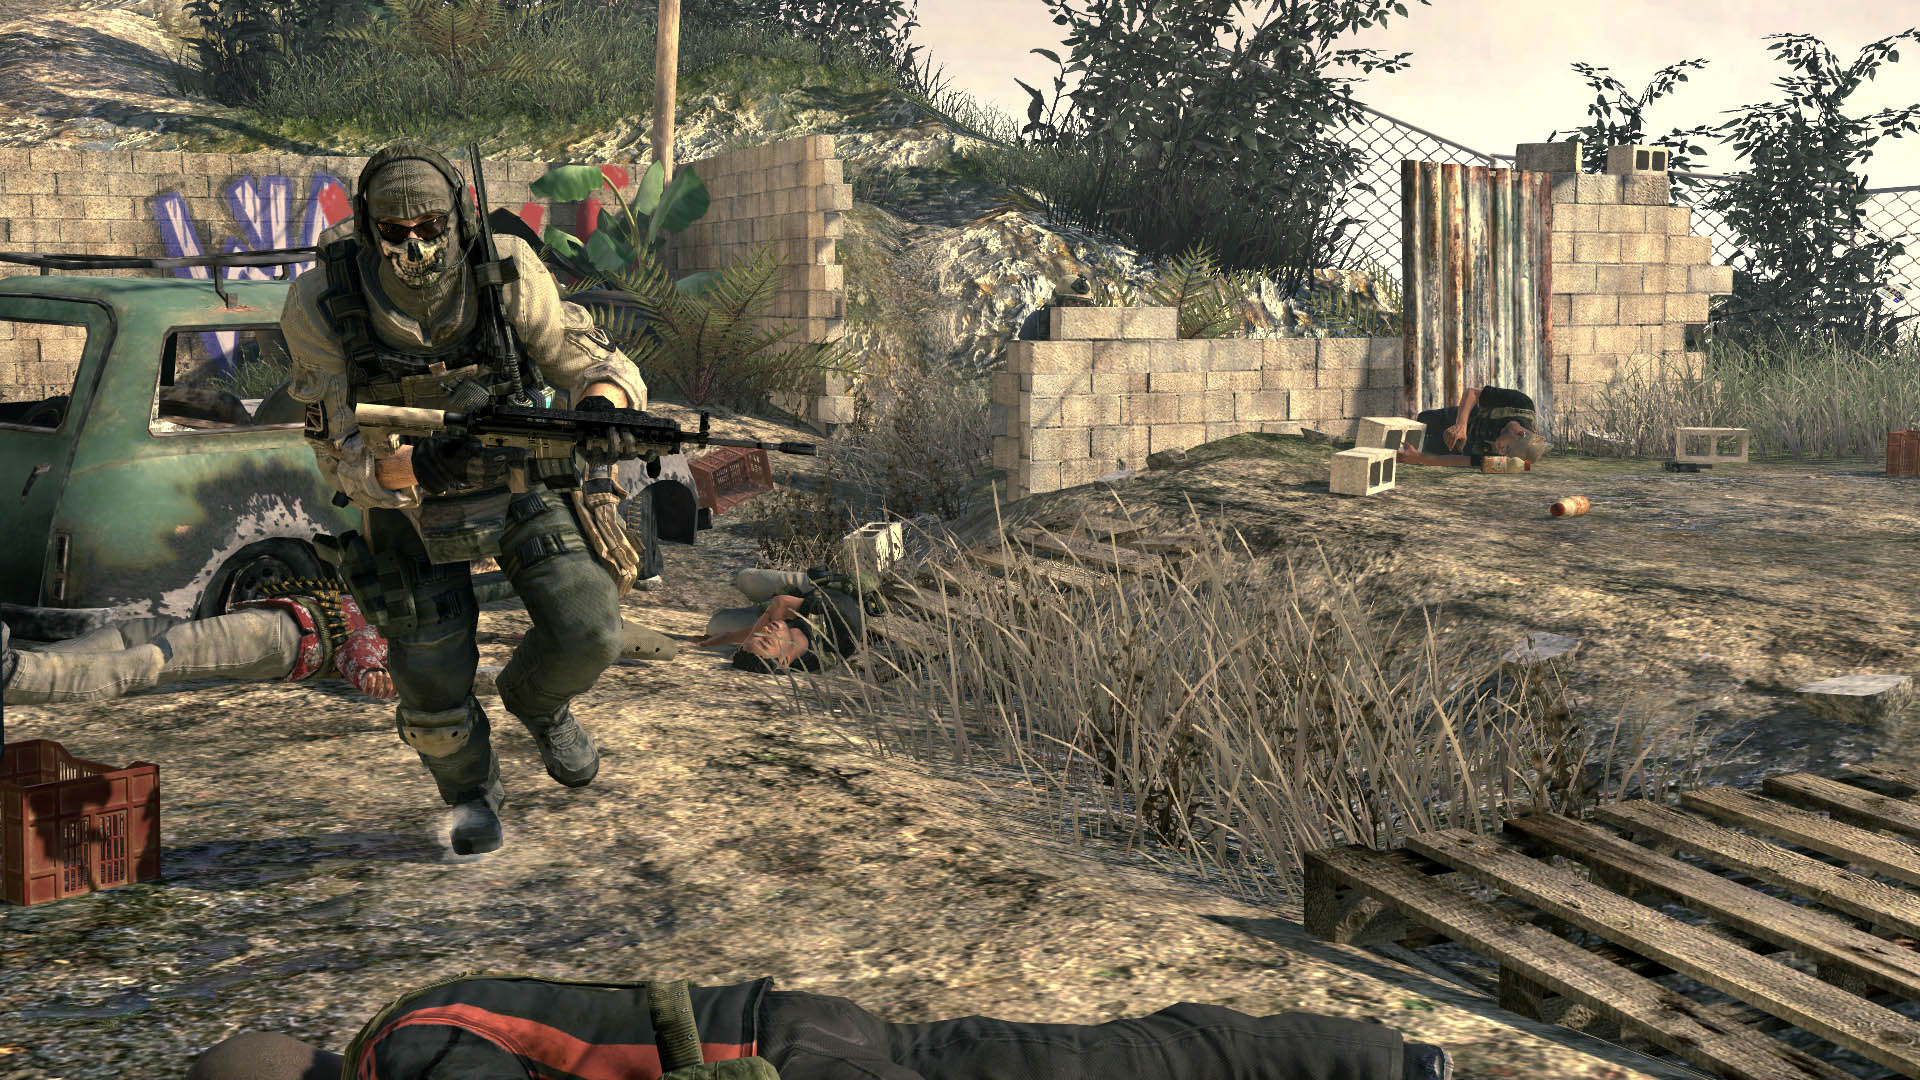 Call of Duty: Revealed Files Hint a Remastered Version of Modern Warfare 2  Multiplayer - EssentiallySports